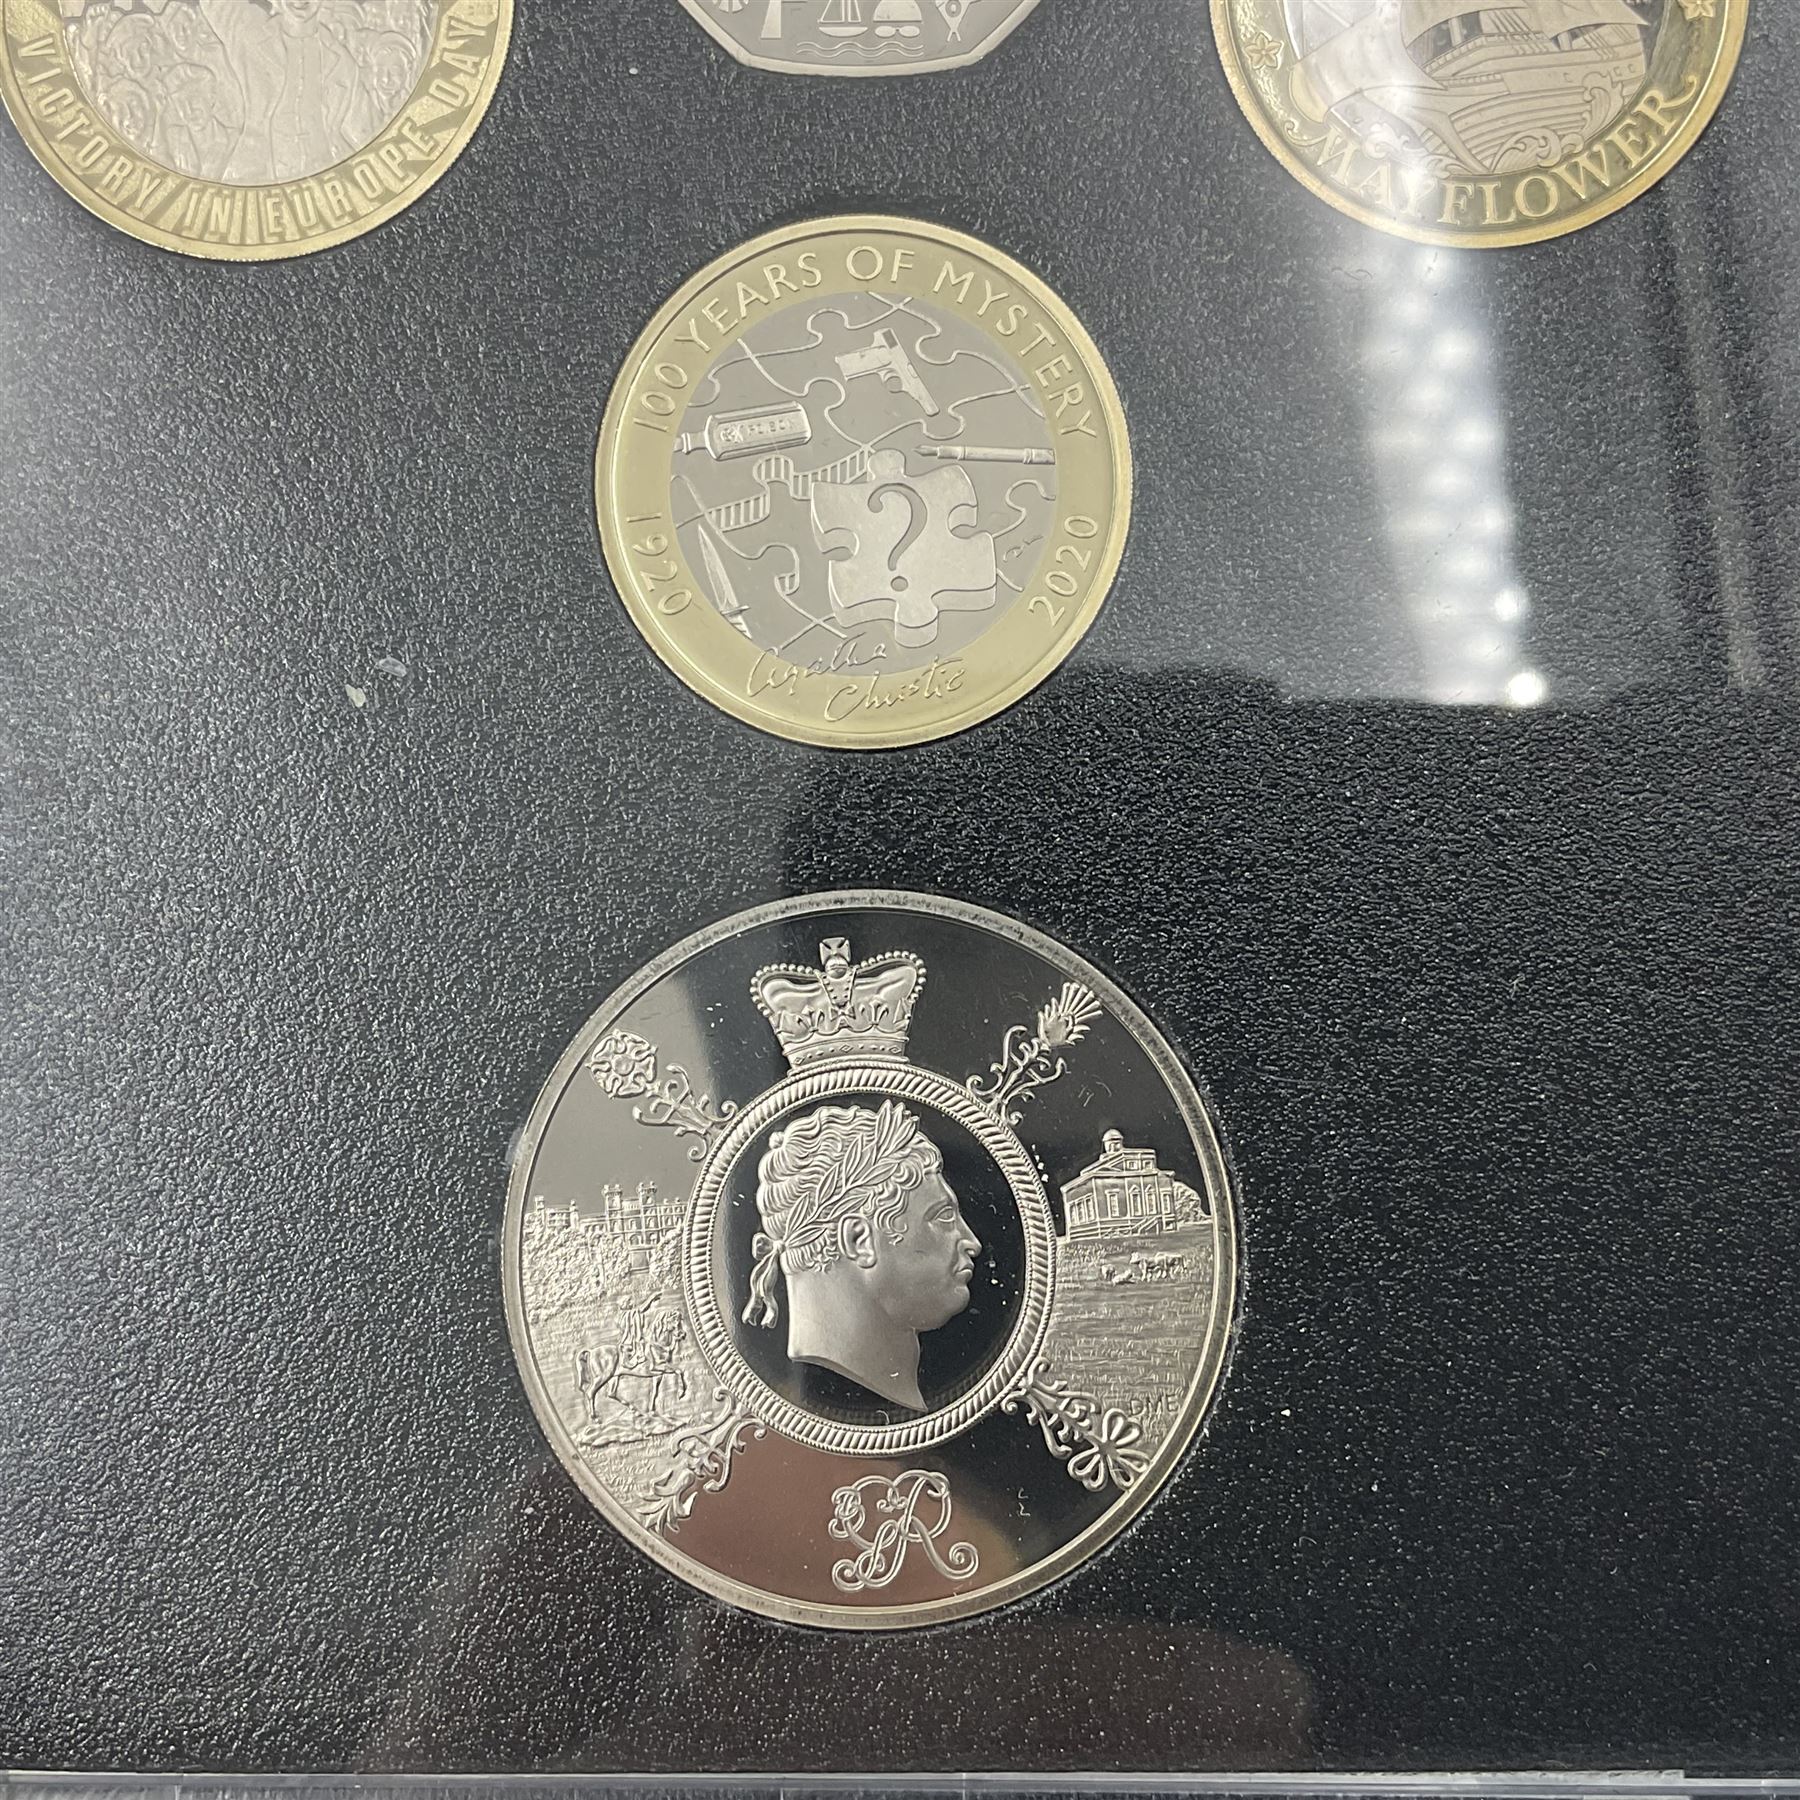 The Royal Mint United Kingdom 2020 proof coin set - Image 5 of 7